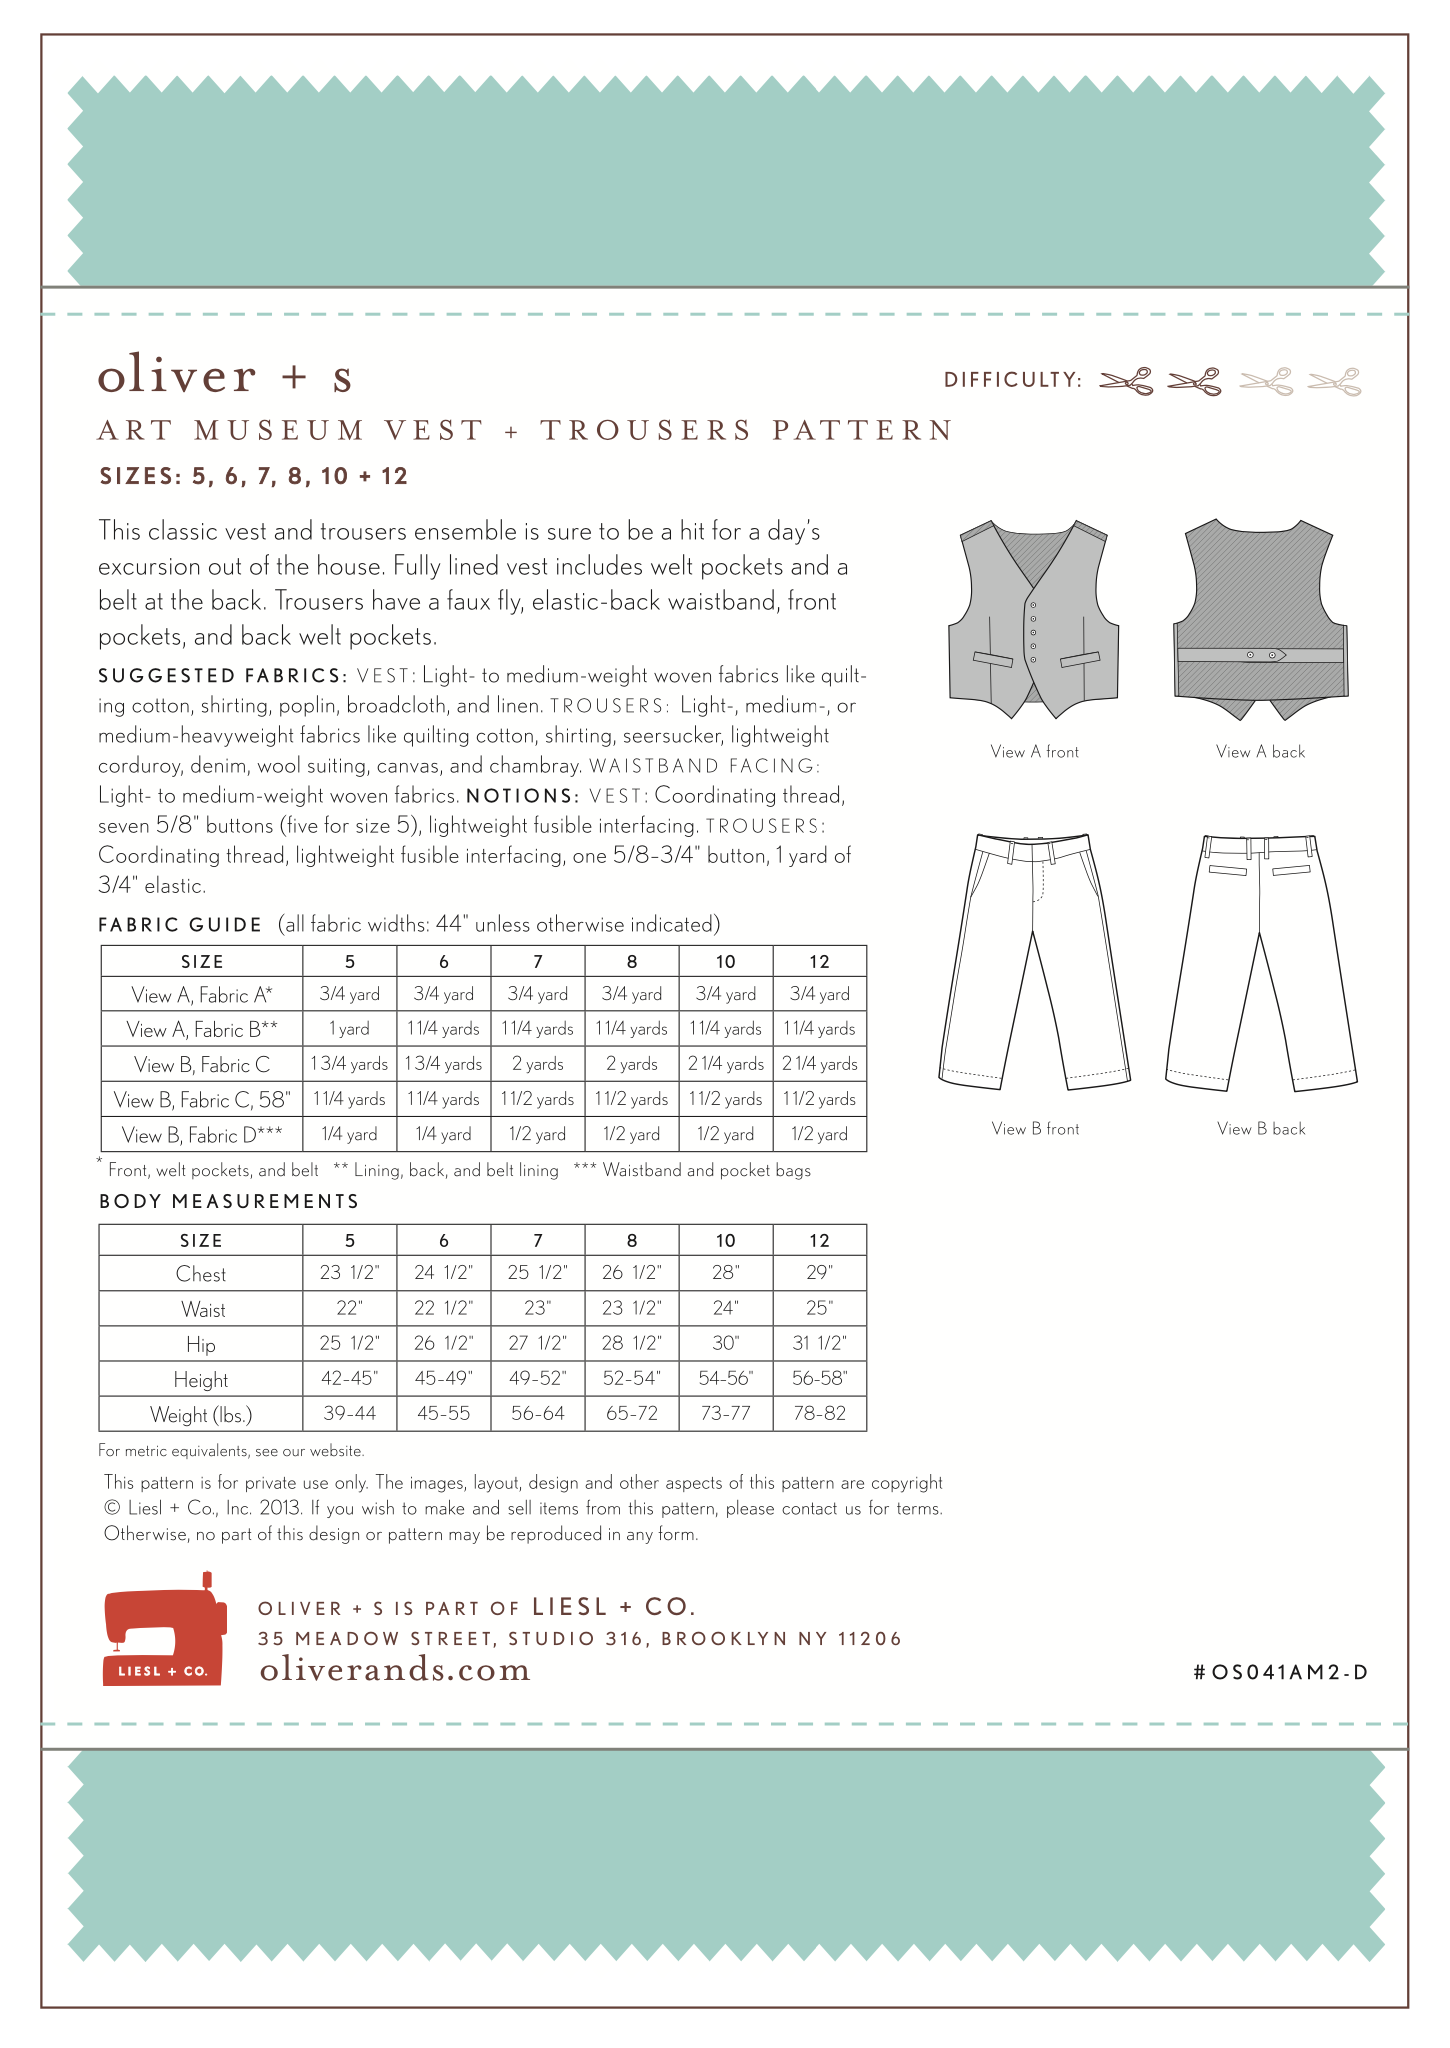 Oliver + S Art Museum Vest and Trousers